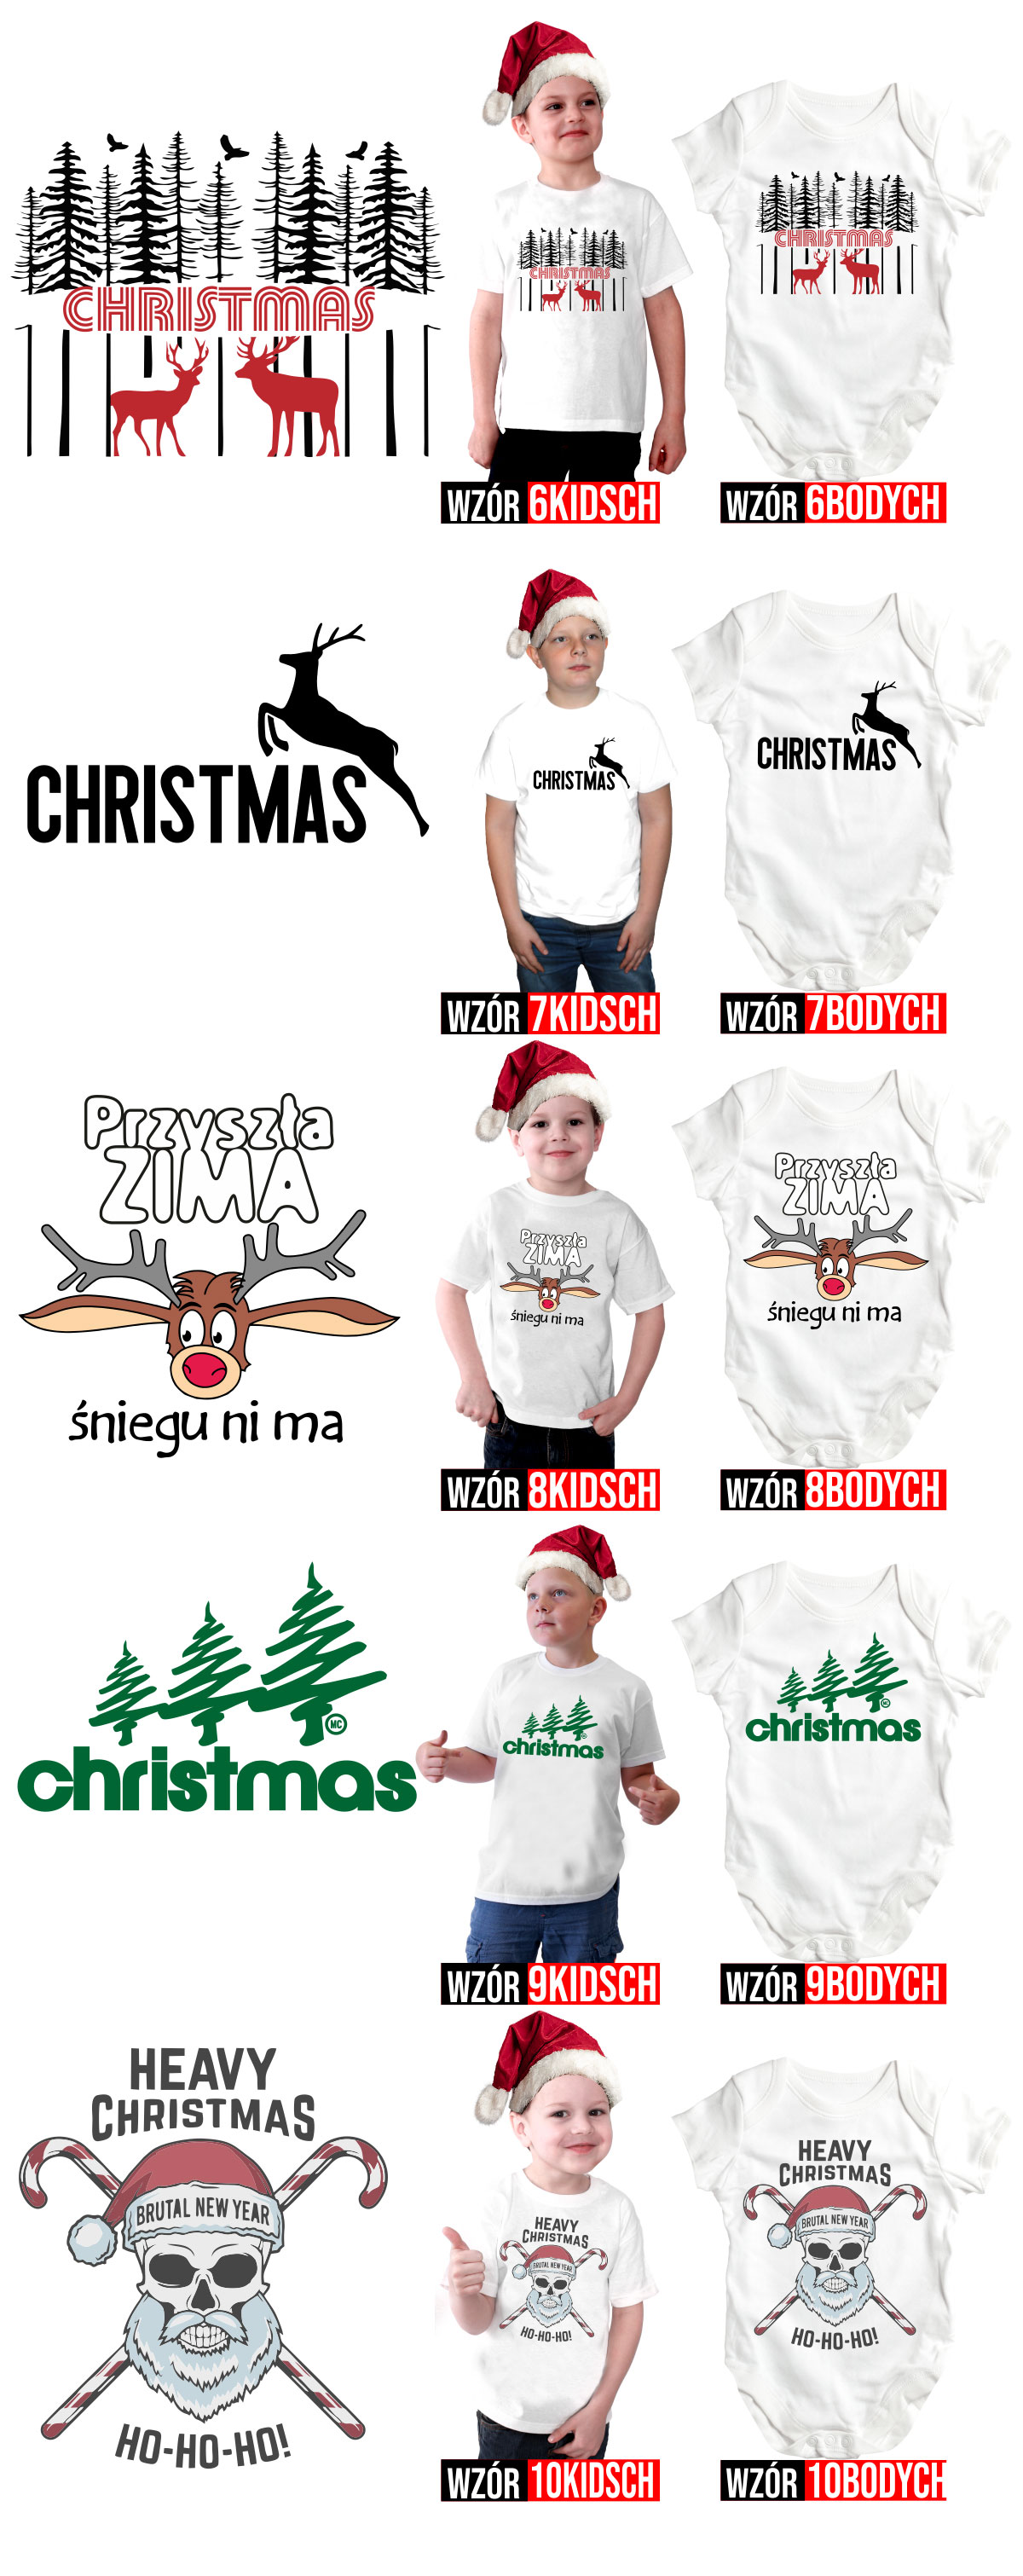 merry chistmas every one santa claus t-shirts